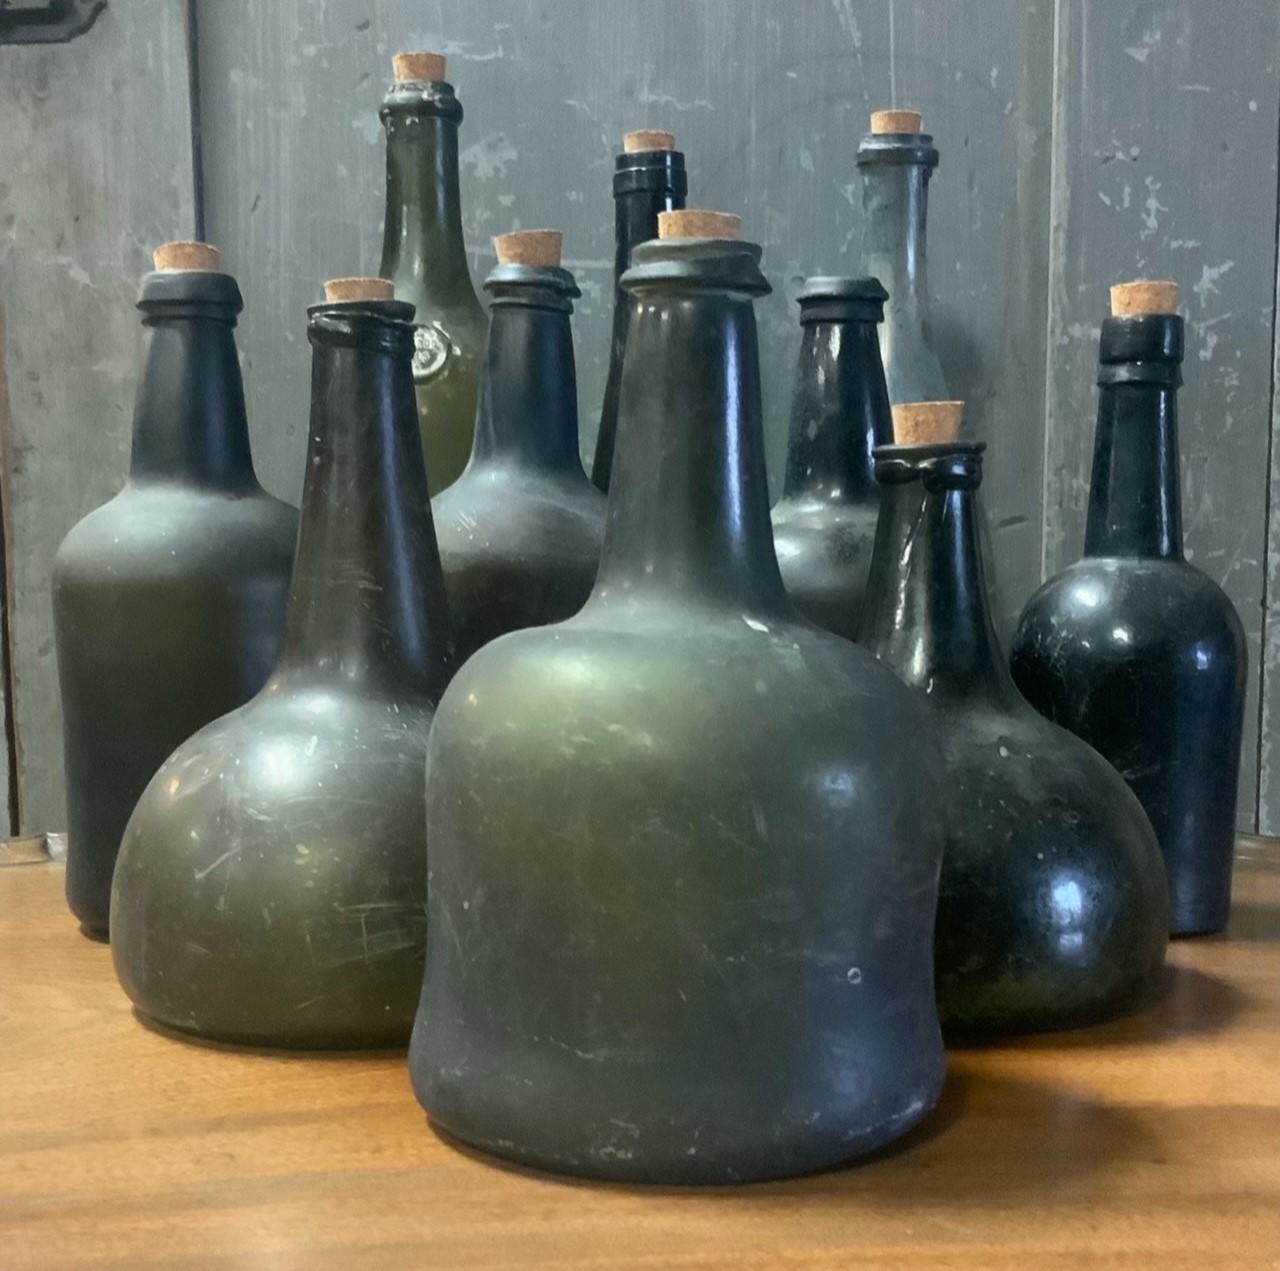 18TH/19TH C. GLASS BOTTLES. Two